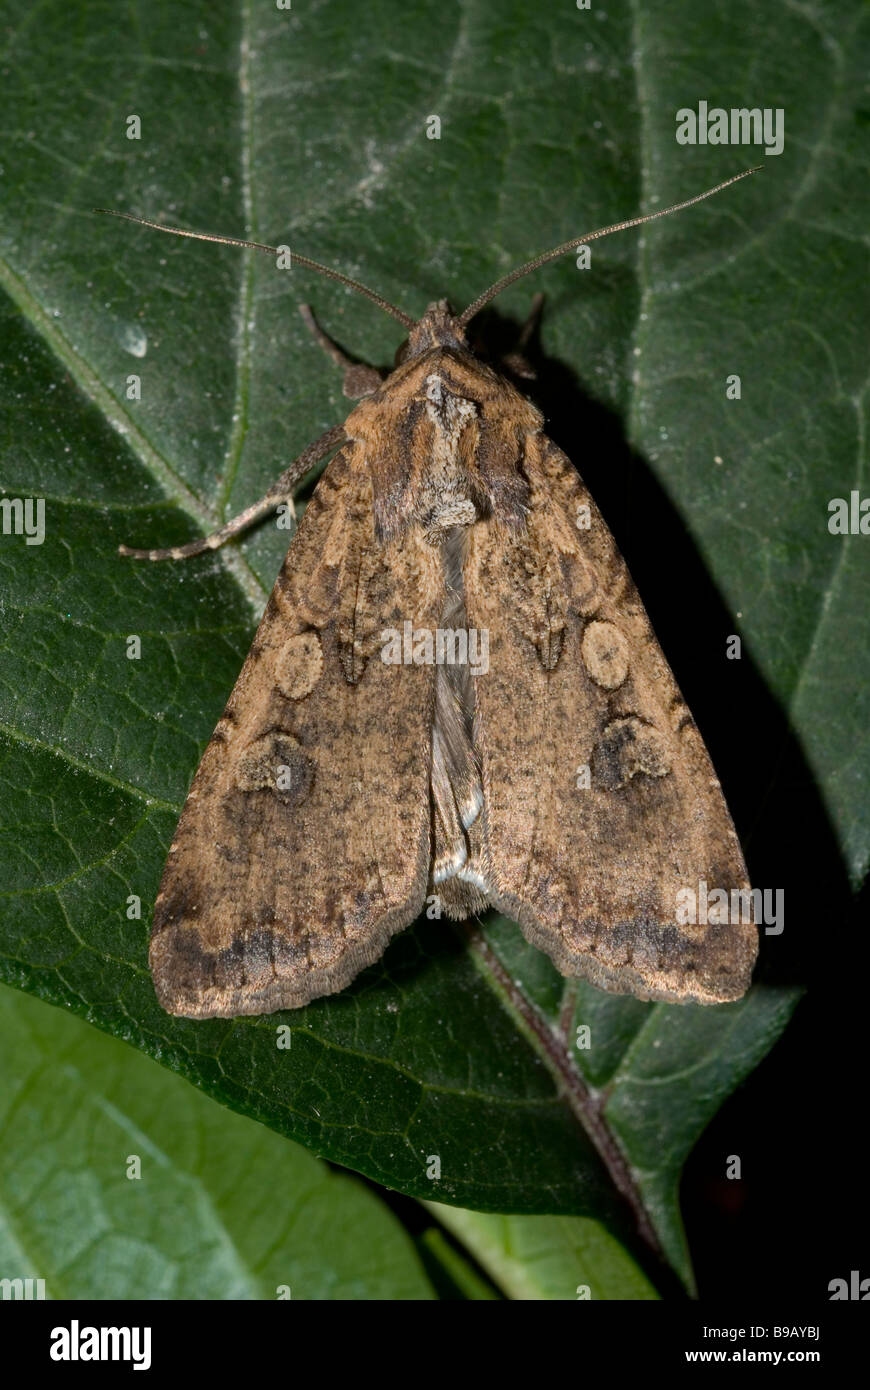 Pearly underwing butterfly (Peridroma saucia) Stock Photo